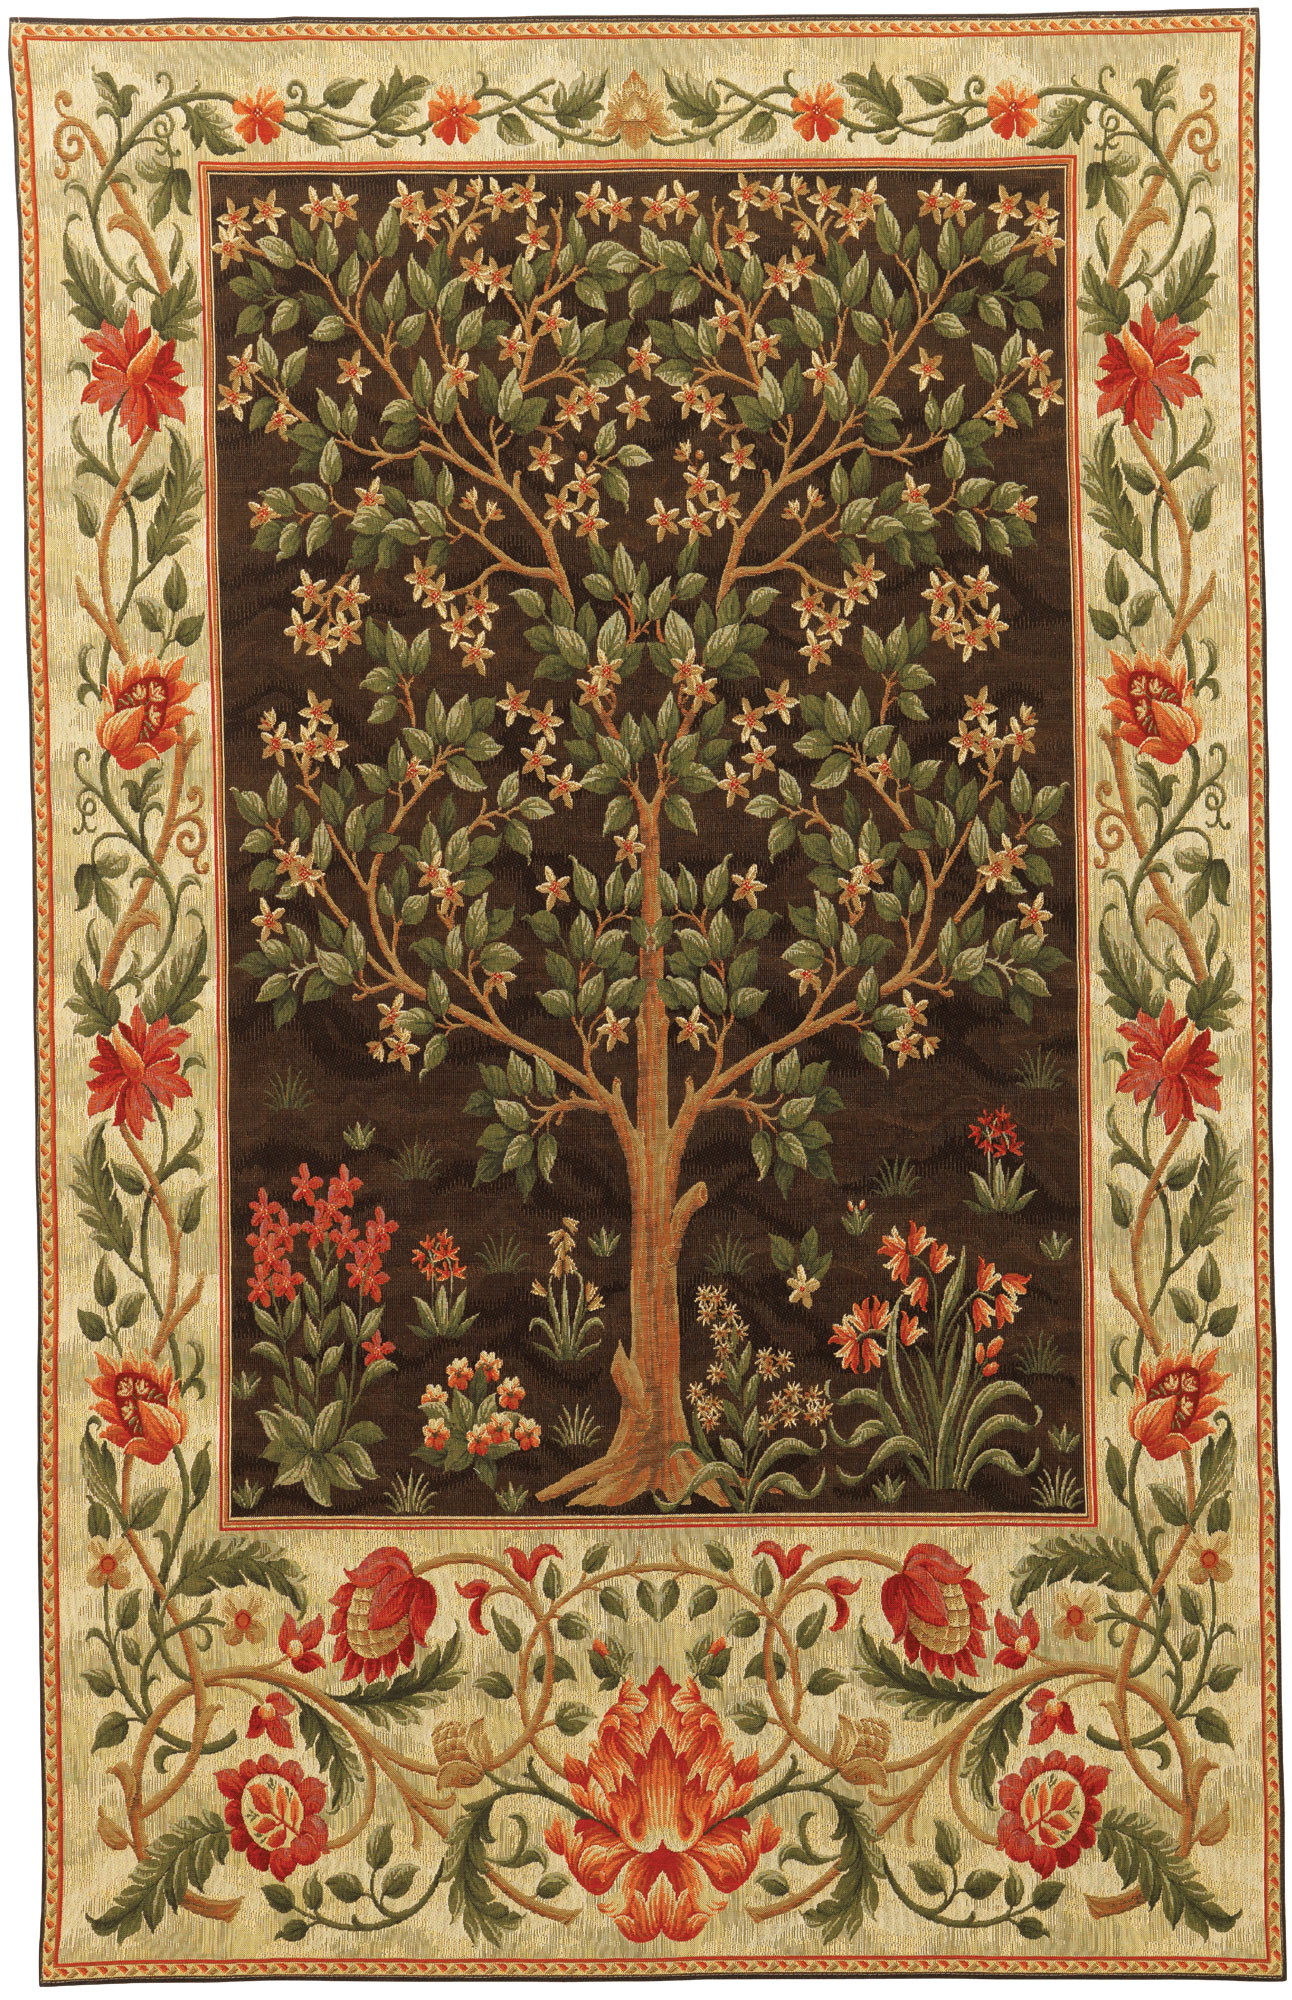 Tapestry "Tree of Life" (brown, large, 145 x 90 cm) - after William Morris